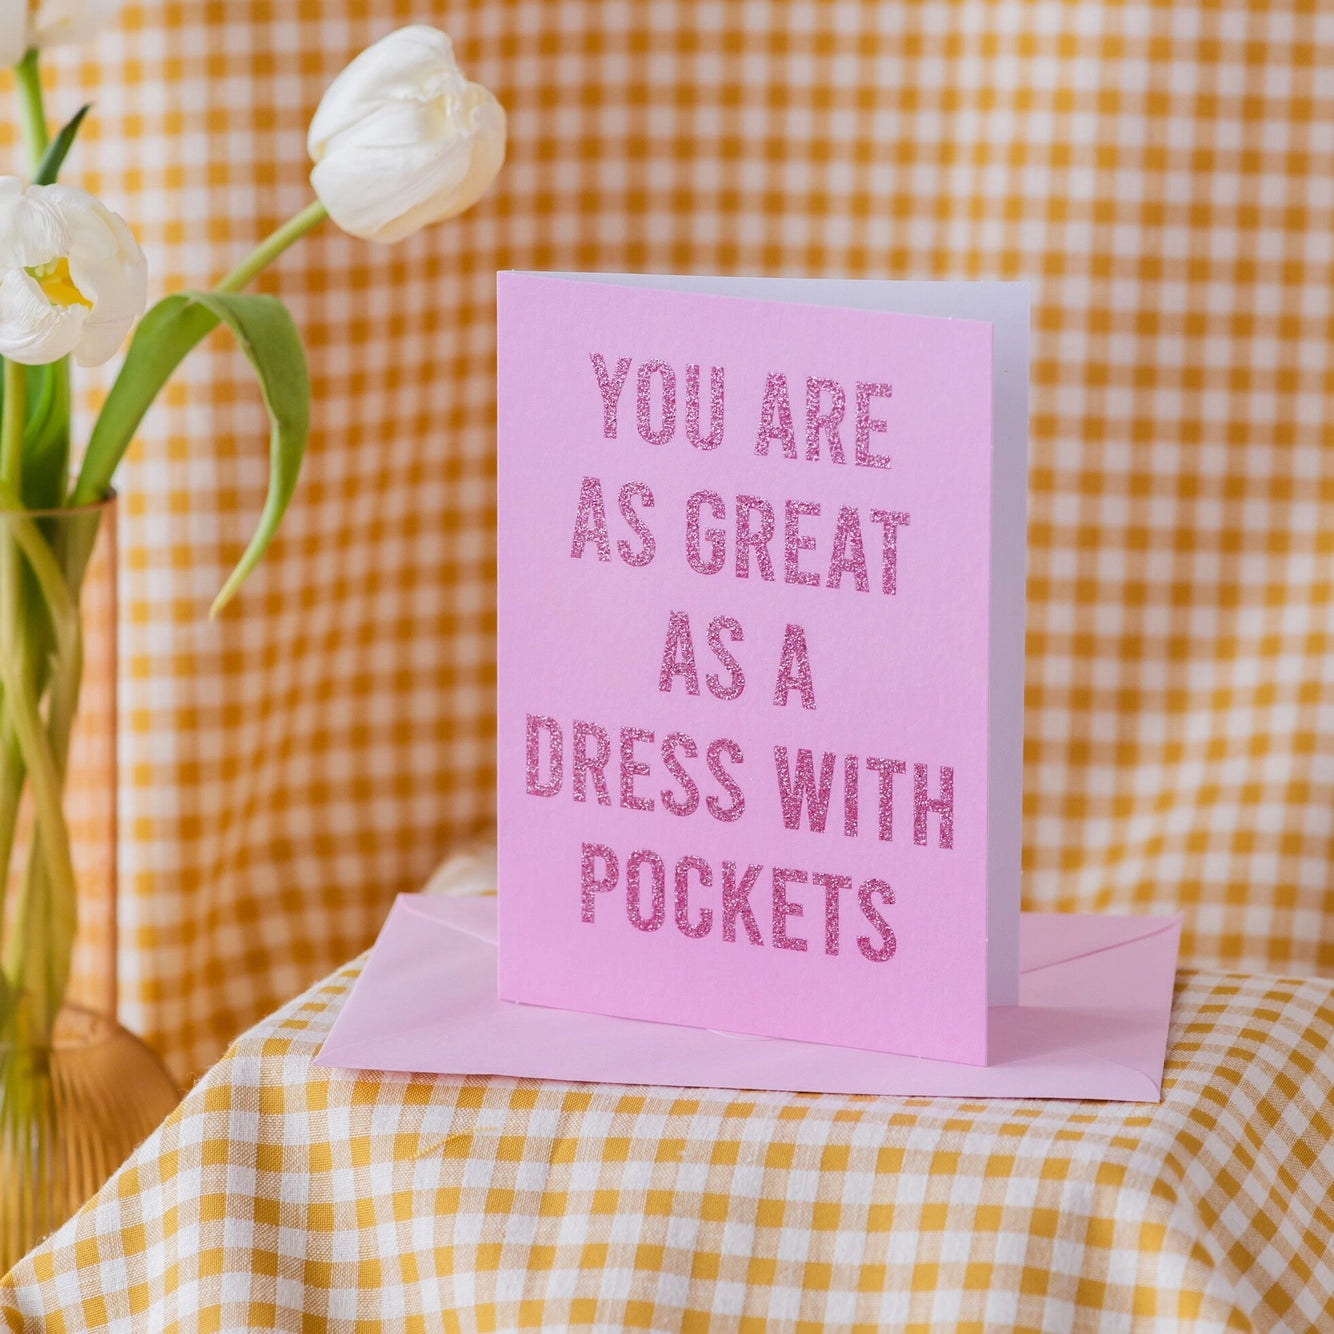 "You Are as Great as a Dress with Pockets" Biodegradable Glitter Greetings Card